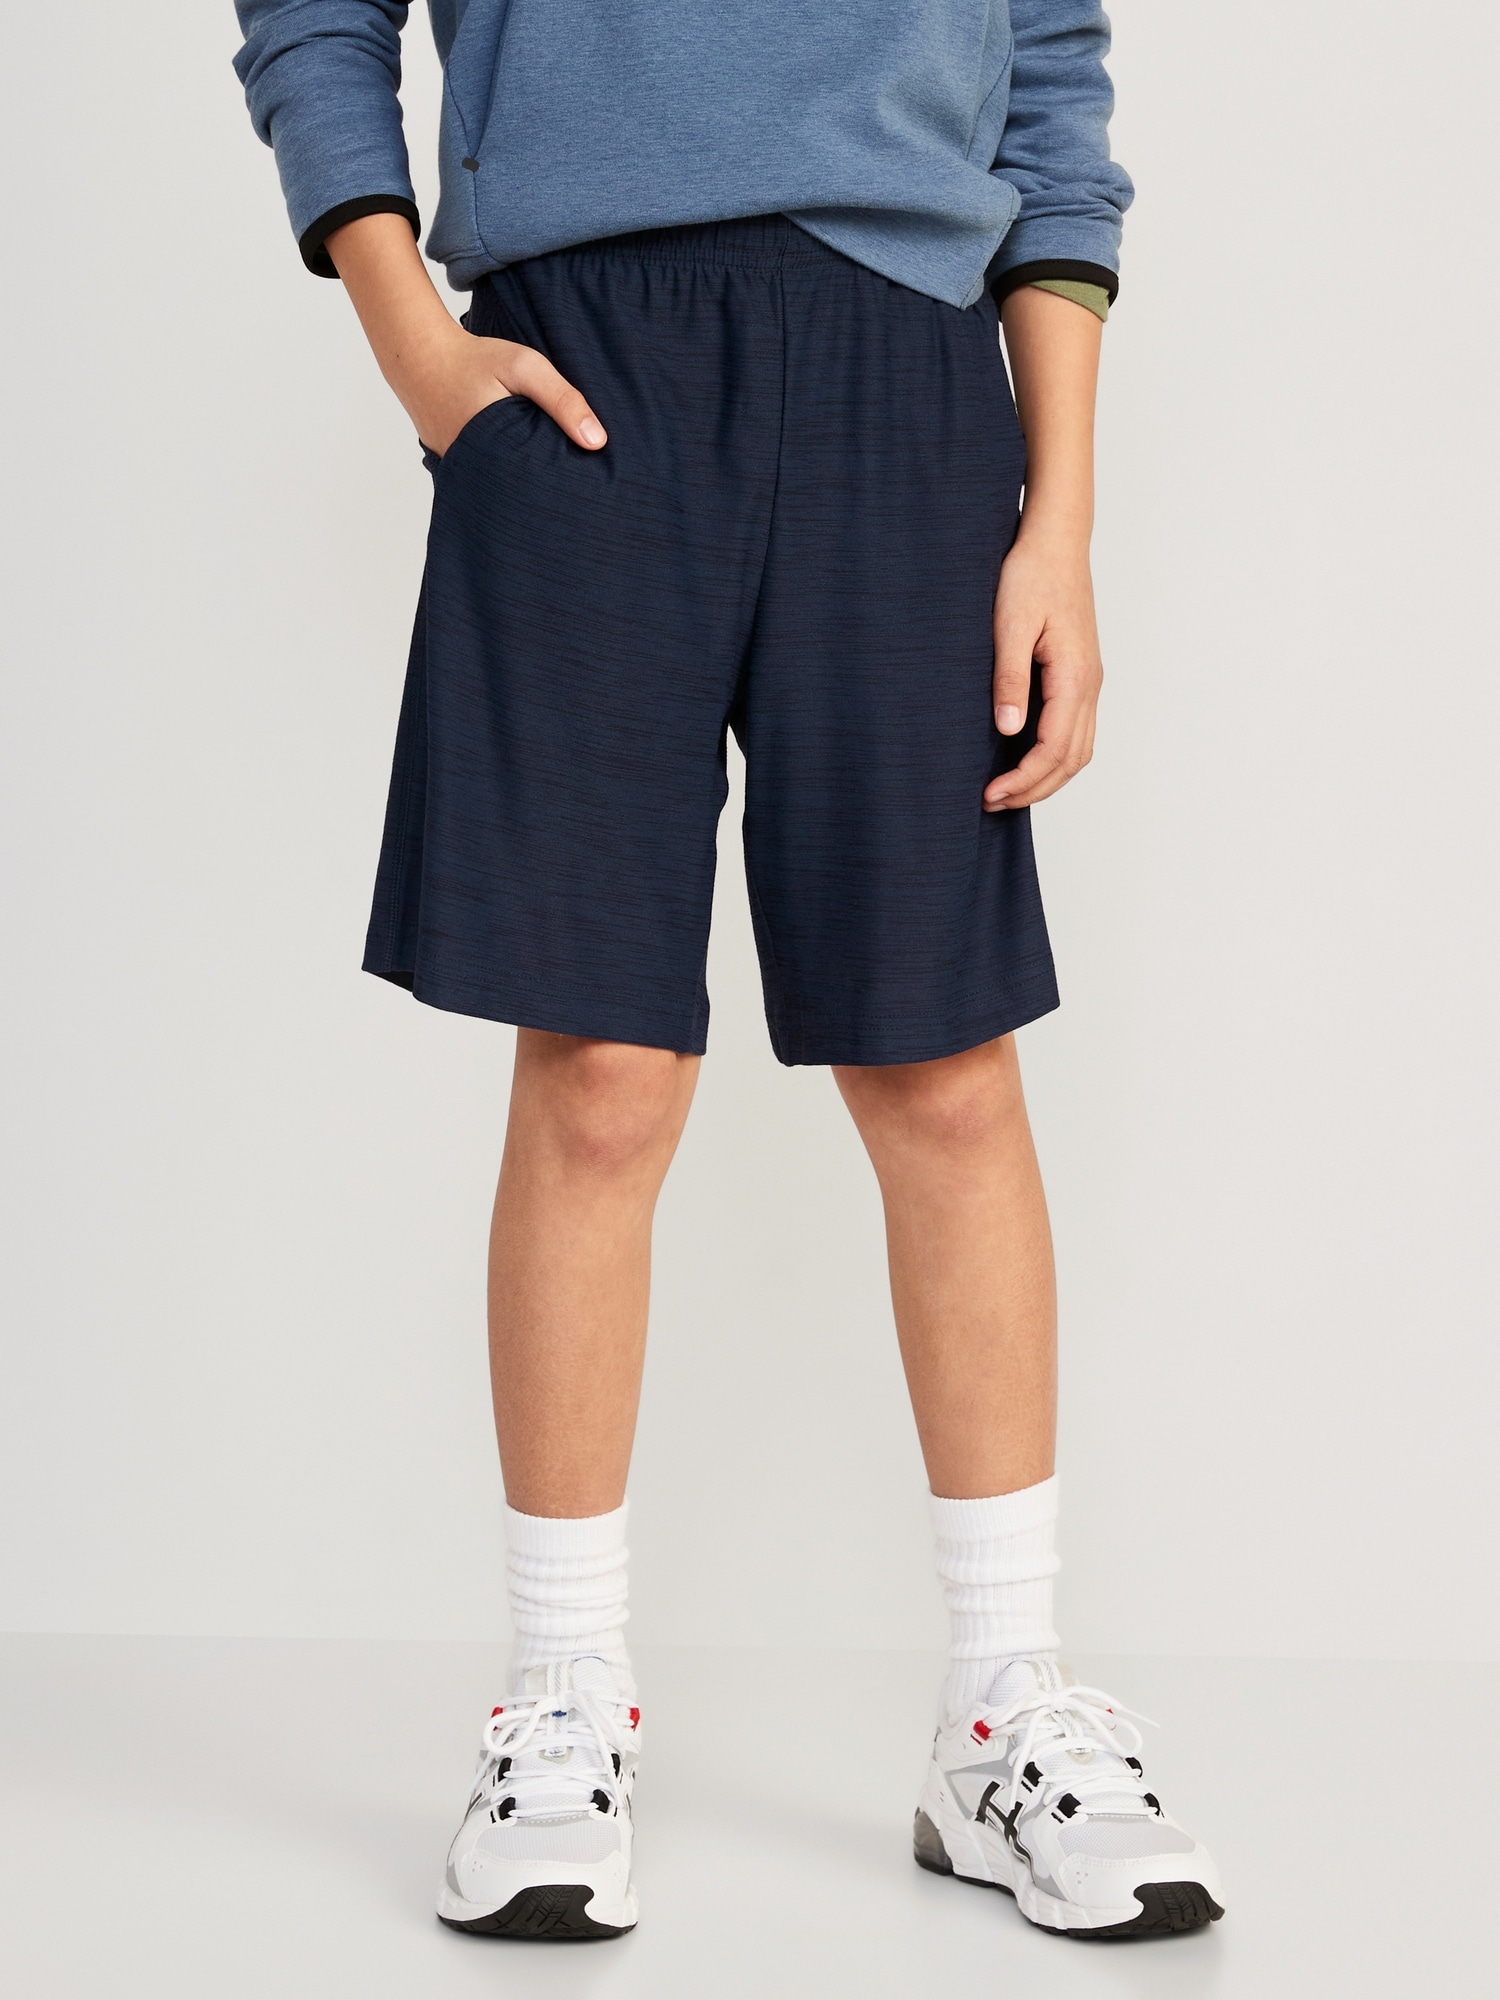 Breathe ON Shorts for Boys (At Knee)